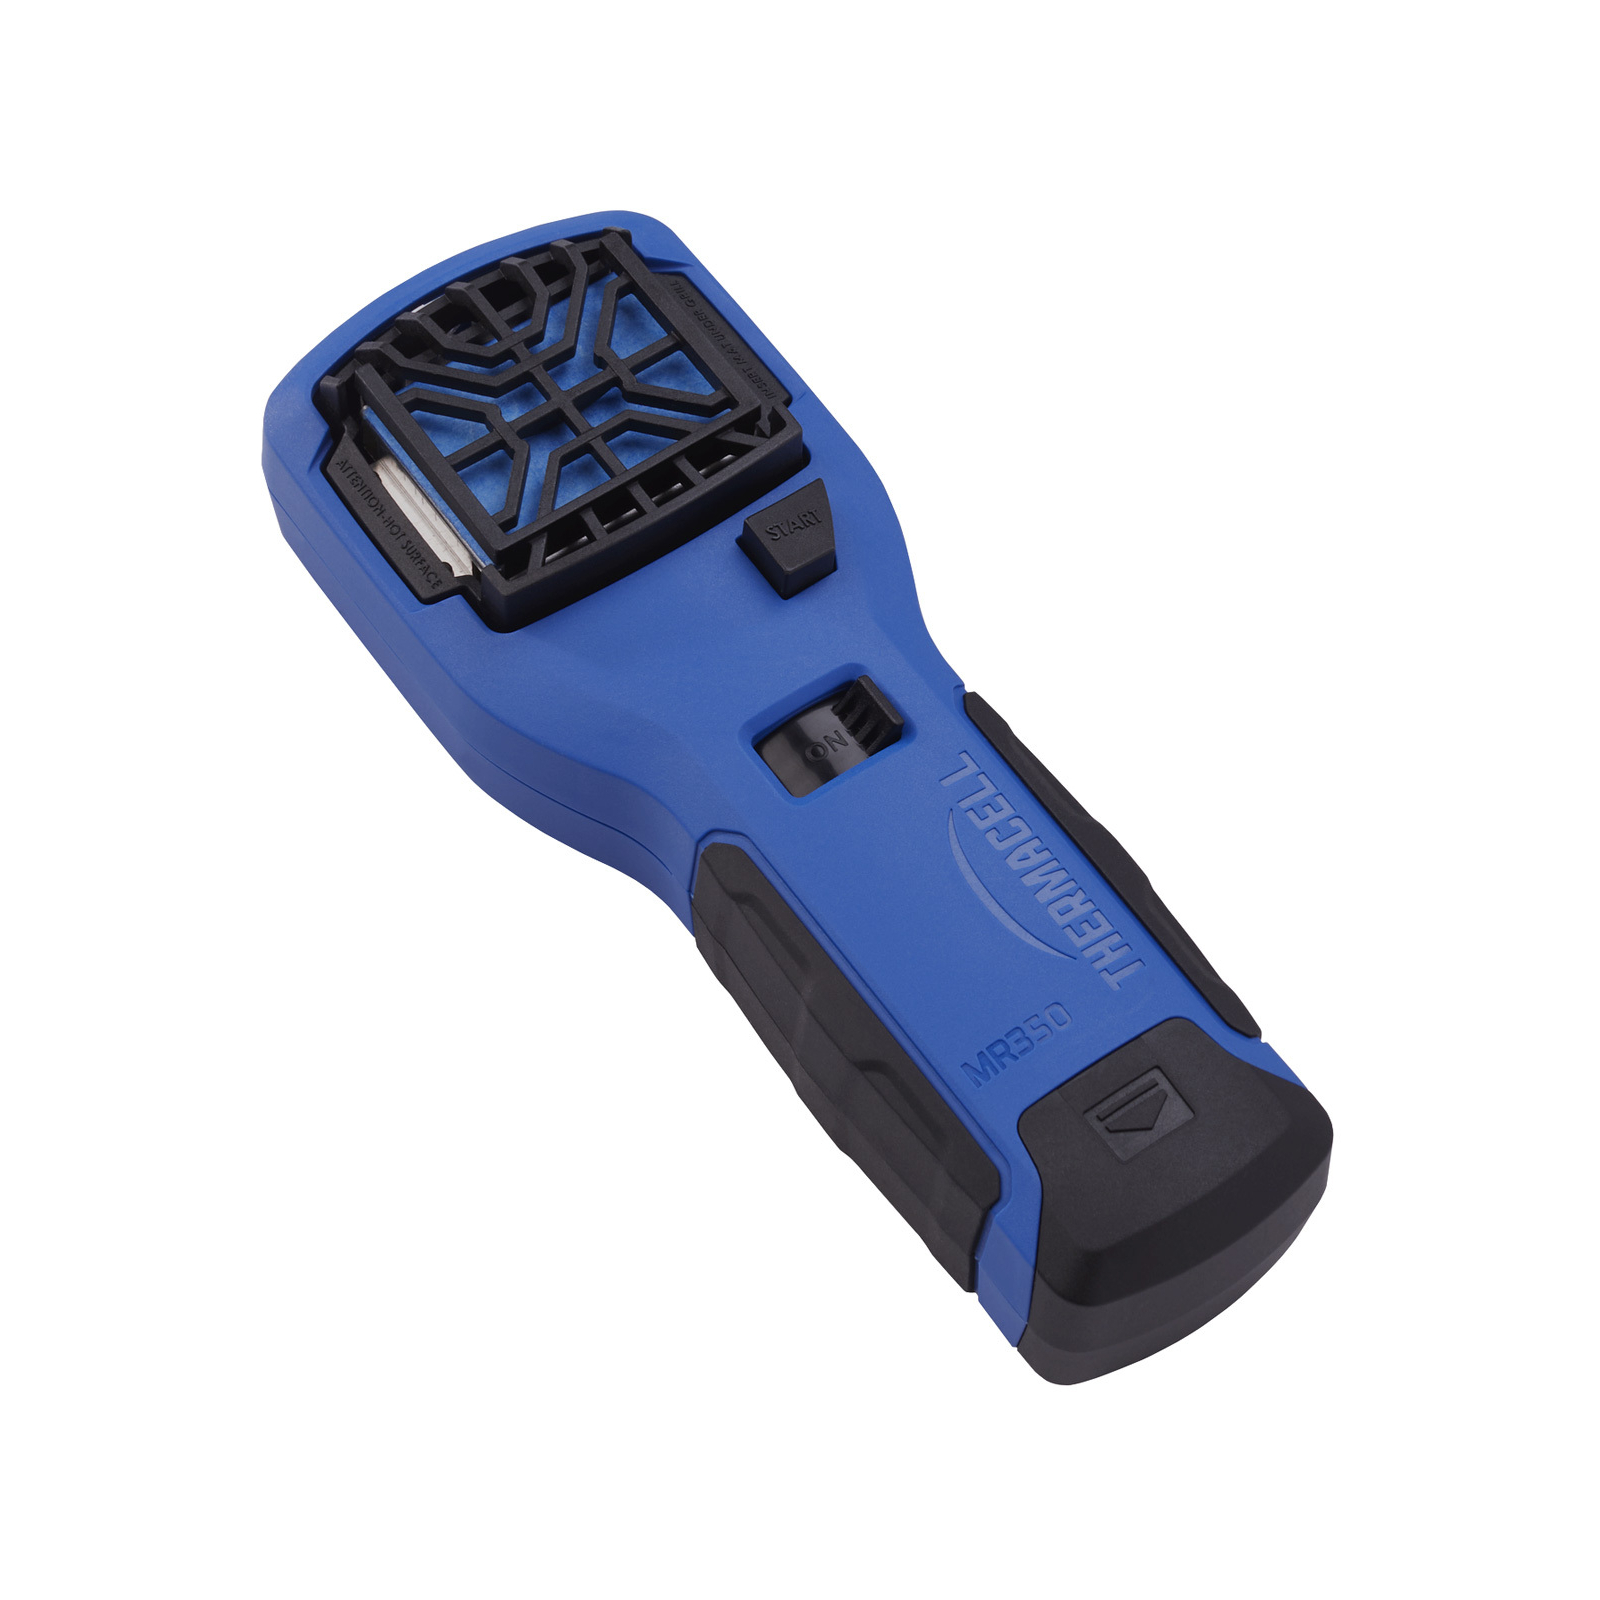 Фумигатор Тhermacell MR-350 Portable Mosquito Repeller Blue (1200.05.90) изображение 2